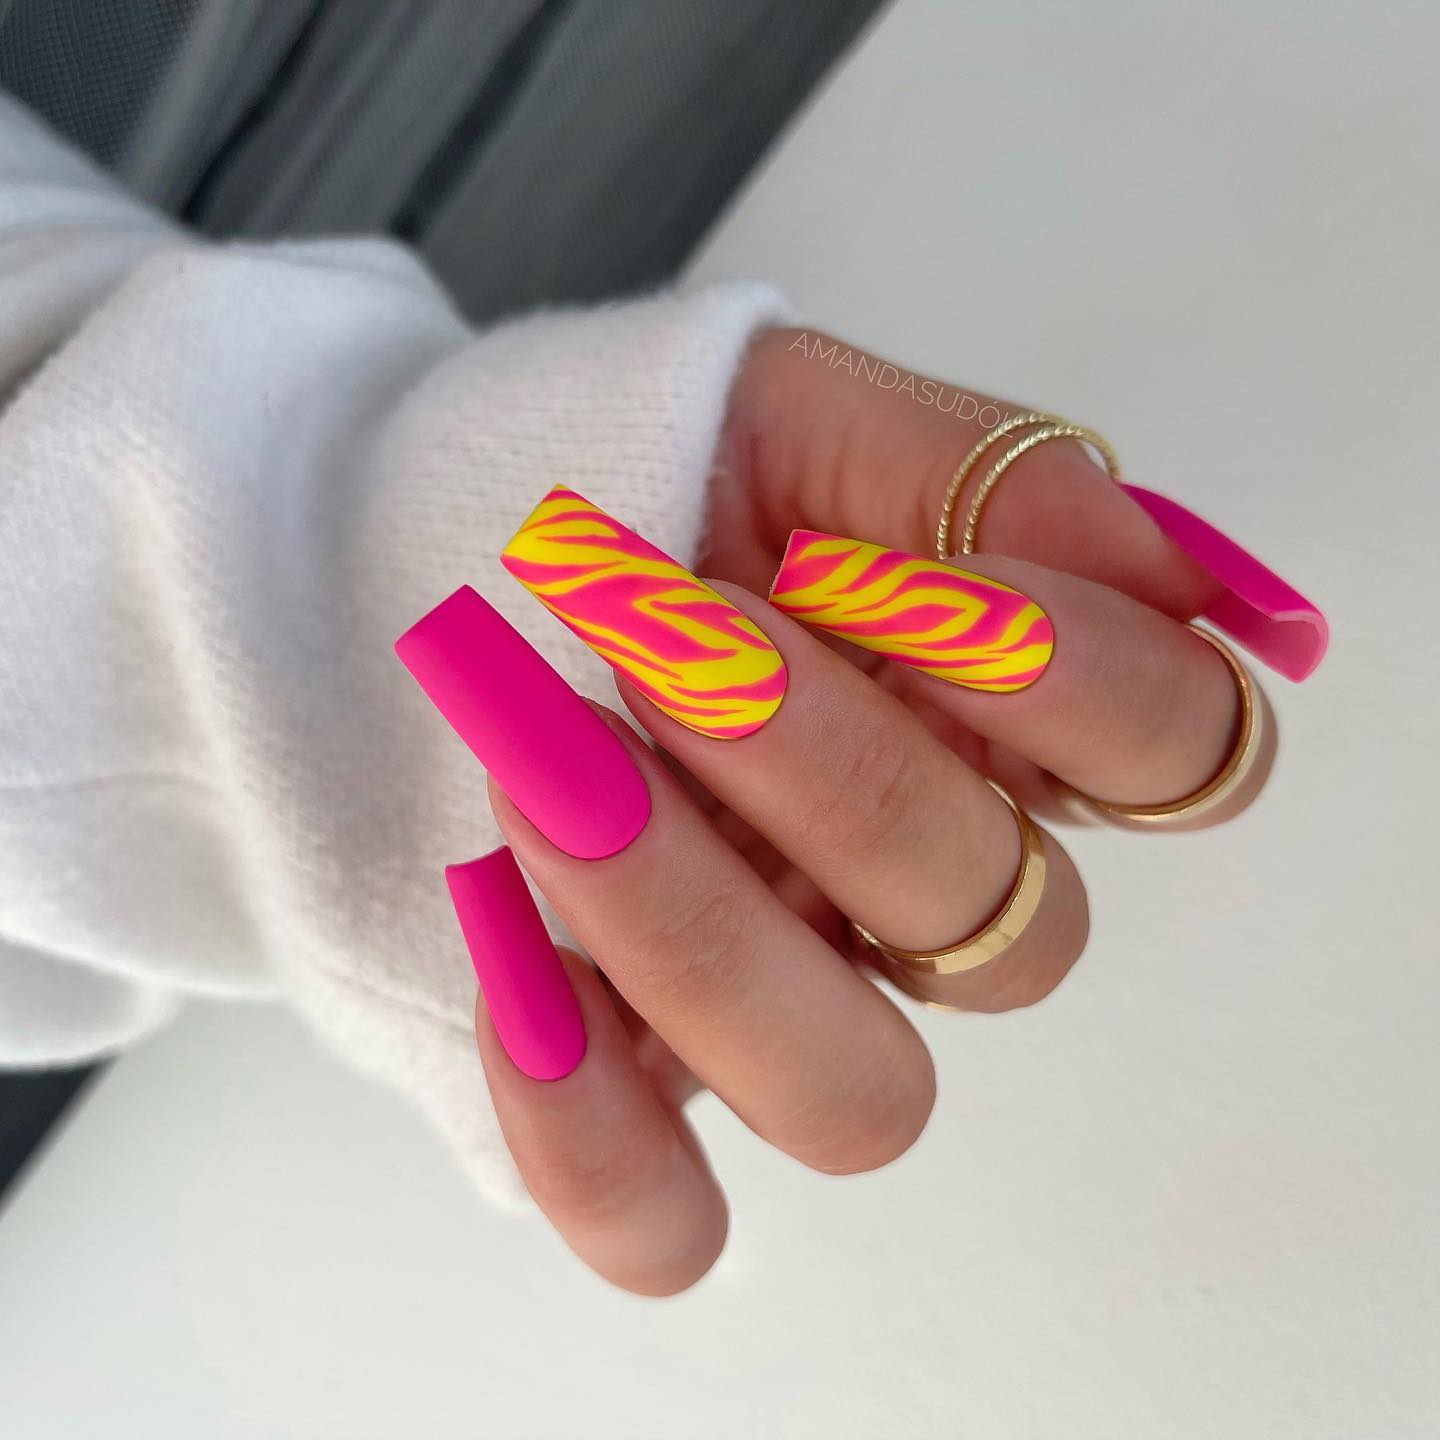 Long Square Pink Matte Nails with Zebra Print